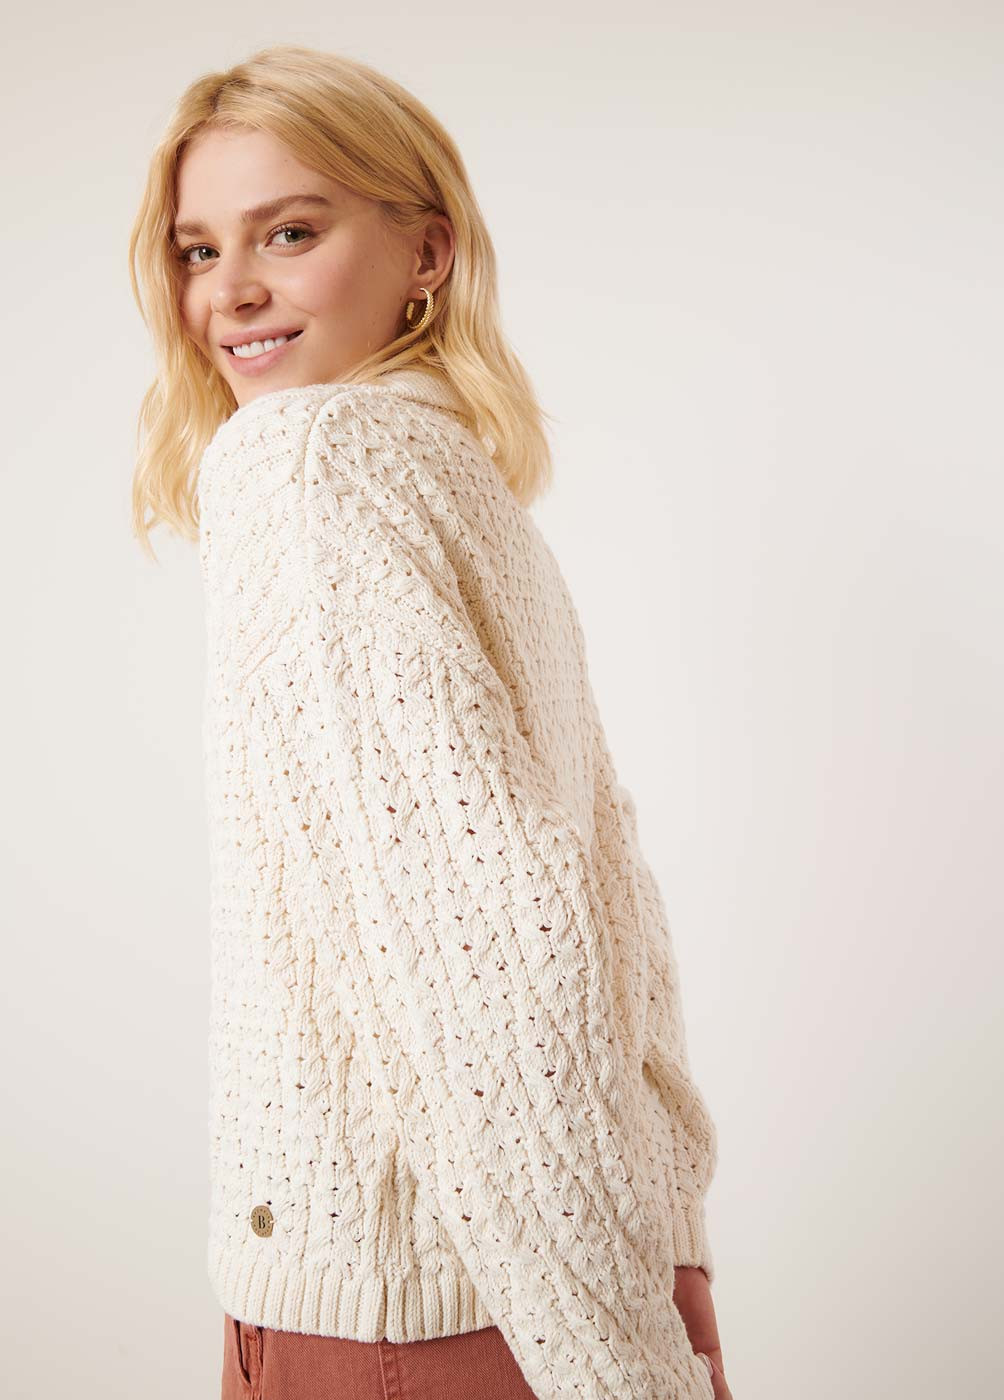 CANDEM BRAIDED POLO-STYLE JUMPER